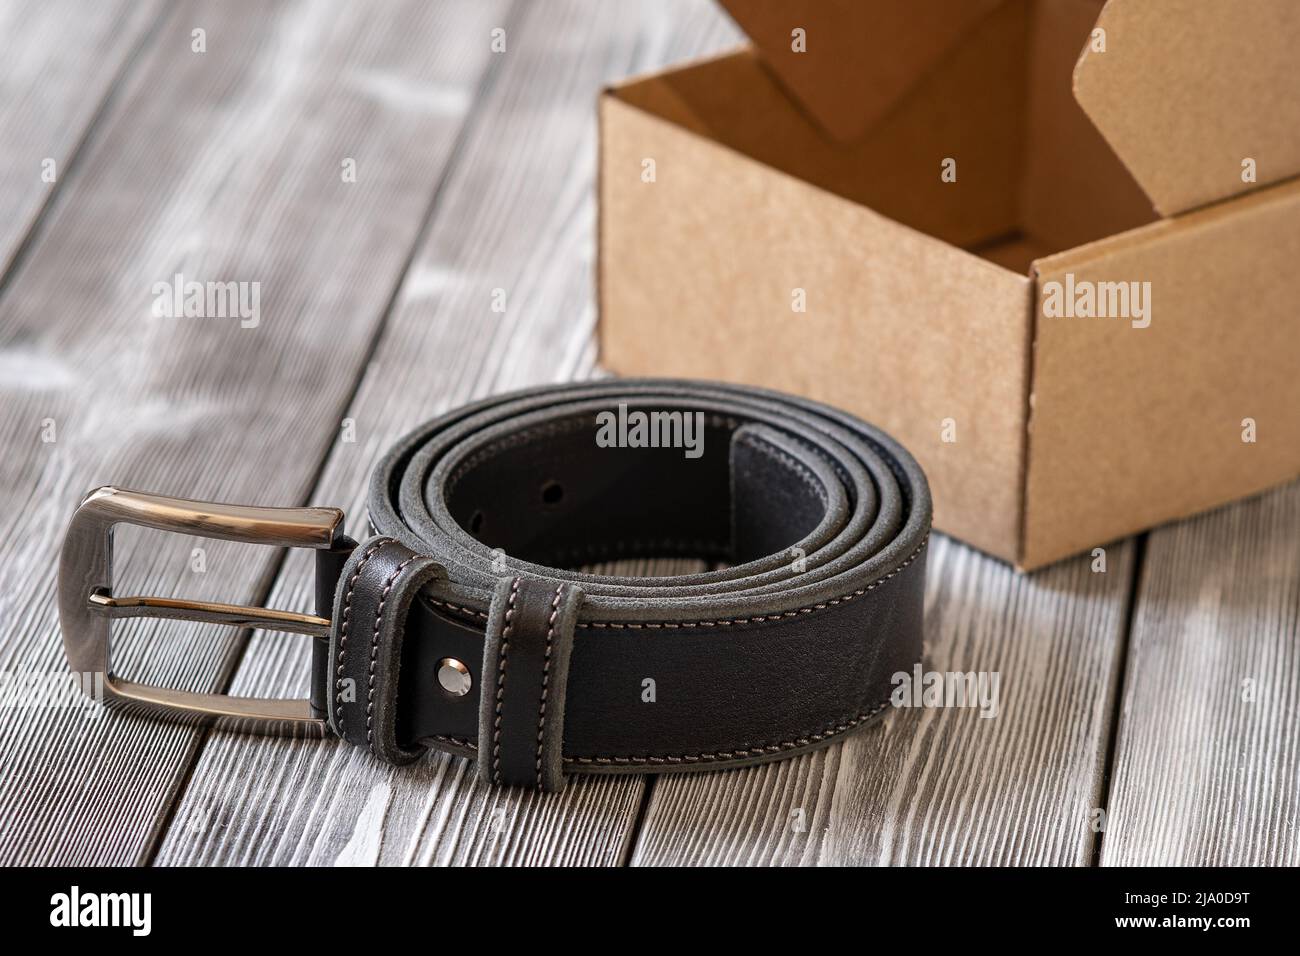 Stylish belt made of black leather and steel fittings on a wooden background. An expensive gift option for men, women, premium leather, a chic surpris Stock Photo